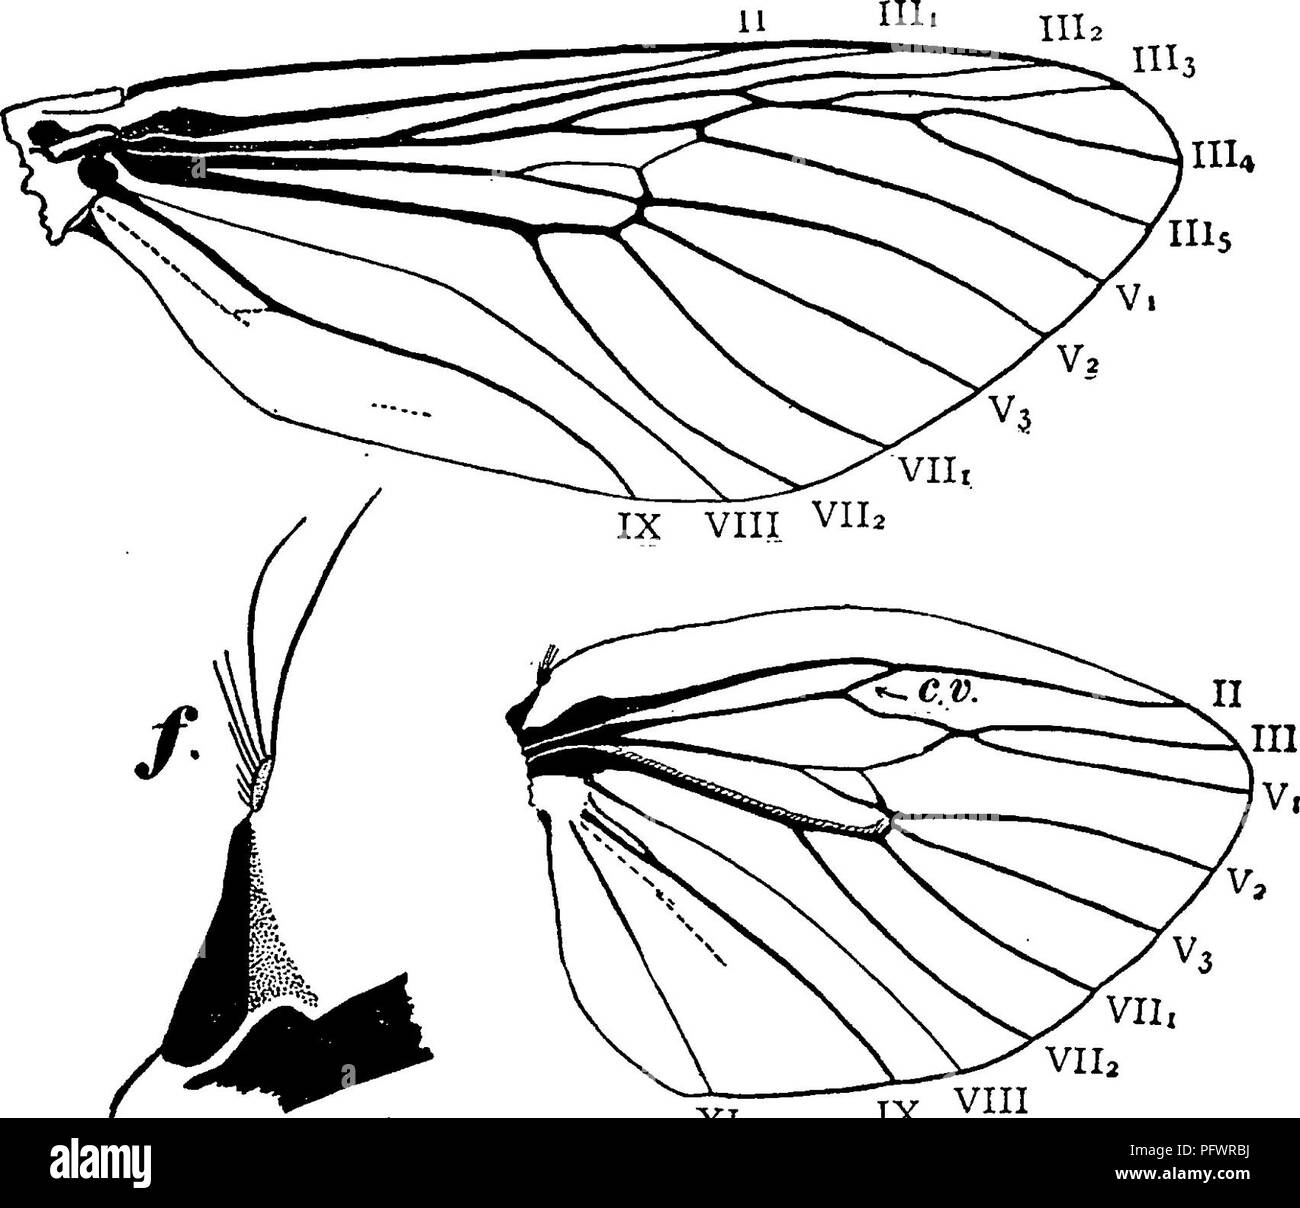 . A manual for the study of insects. Insects. LEPIDOPTERA, 221 within the discal cell. In the hind wings, veins I and II and veins II and III are grown together in an unusual way. In Figure 254 these veins are represented slightly separated in order to show their relation to each other. Family COSSID^ (Cos'si-dae). The Carpenter-moths. This family includes moths with spindle-shaped bodies^ and narrow, strong wings, some of the species resembling Hawk-moths quite closely in this respect. The larvae are wood-borers, living in the solid wood of the trunks of trees. They are often very injurious t Stock Photo